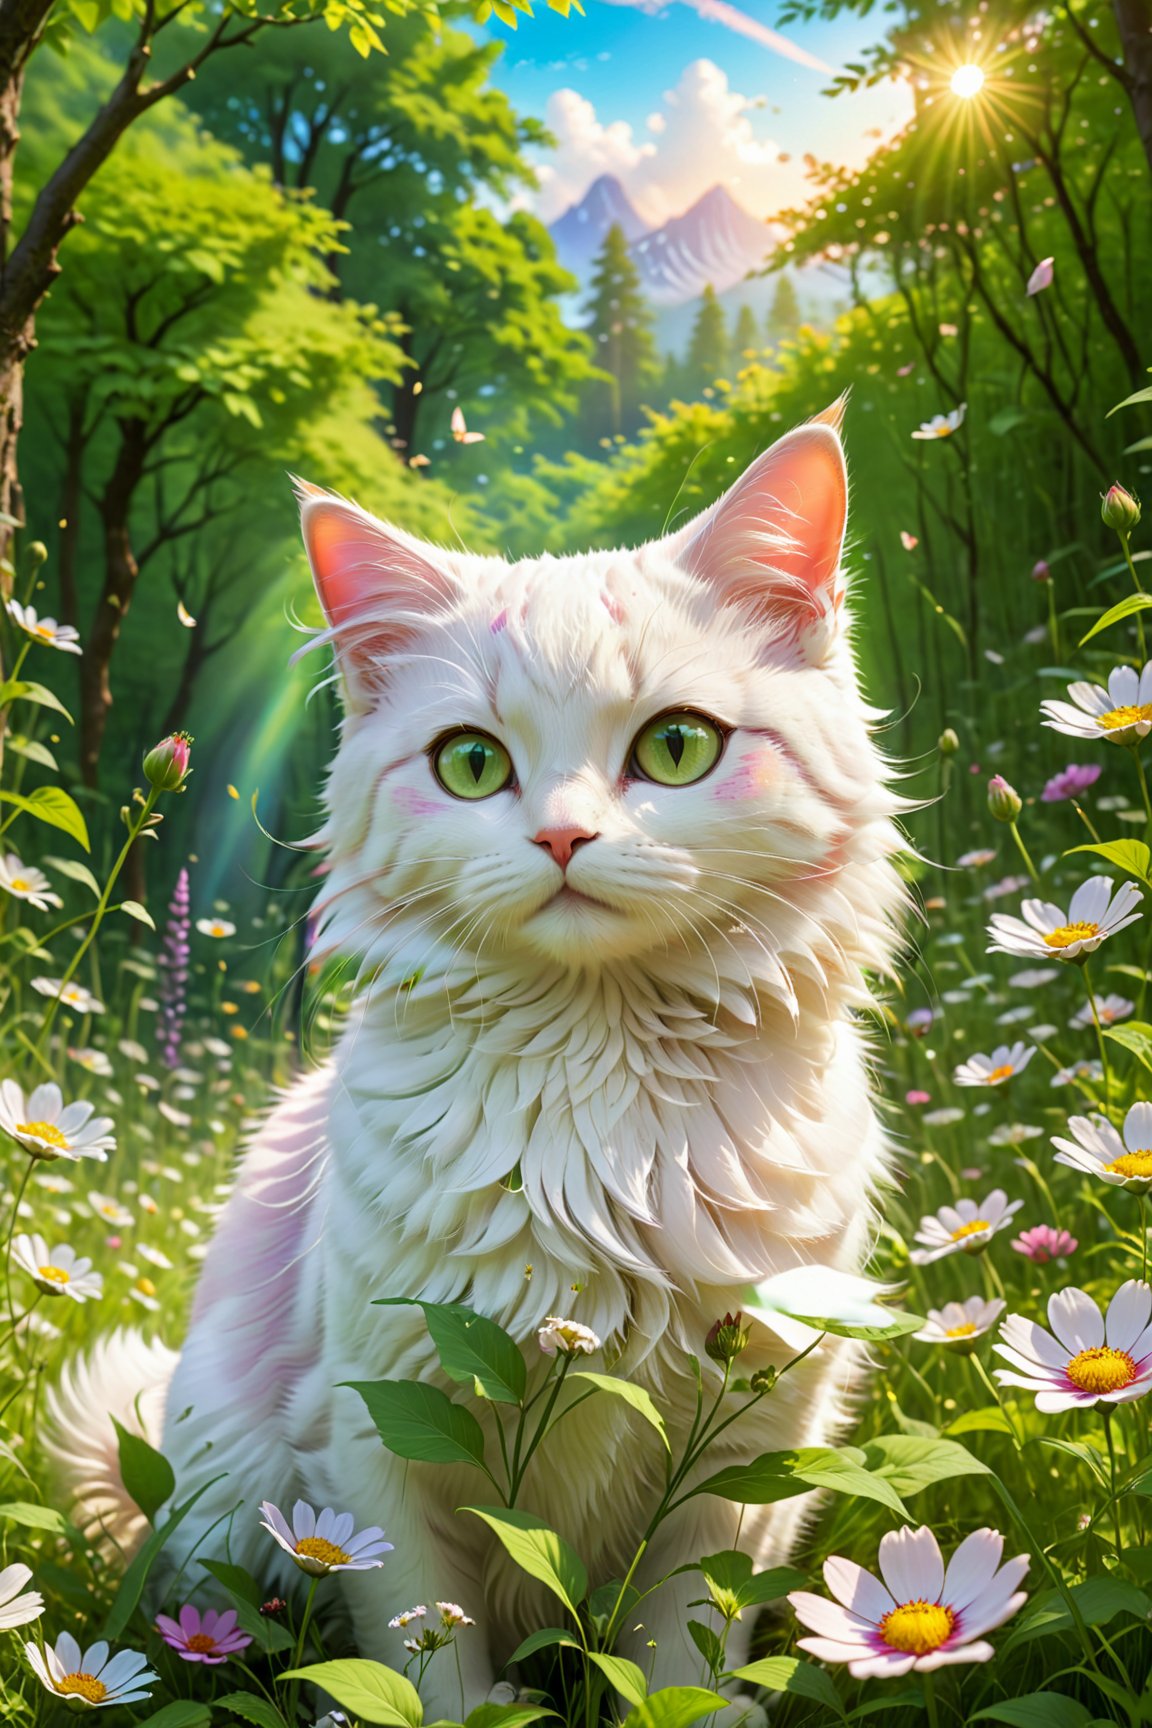 (best quality,4k,highres,ultra-detailed,masterpiece:1.2),cute anime cat,faraway distant shot,white cat,forest of flowers,floral paradise,aesthetic flowers,vibrant colors,lush vegetation,sunlight filtering through leaves,peaceful ambiance,serene atmosphere,anime-style cat,vivid shades of green,gentle breeze through the trees,majestic scenery,ethereal beauty,wildflower meadow,colorful petals dancing in the wind,peaceful and tranquil surroundings.